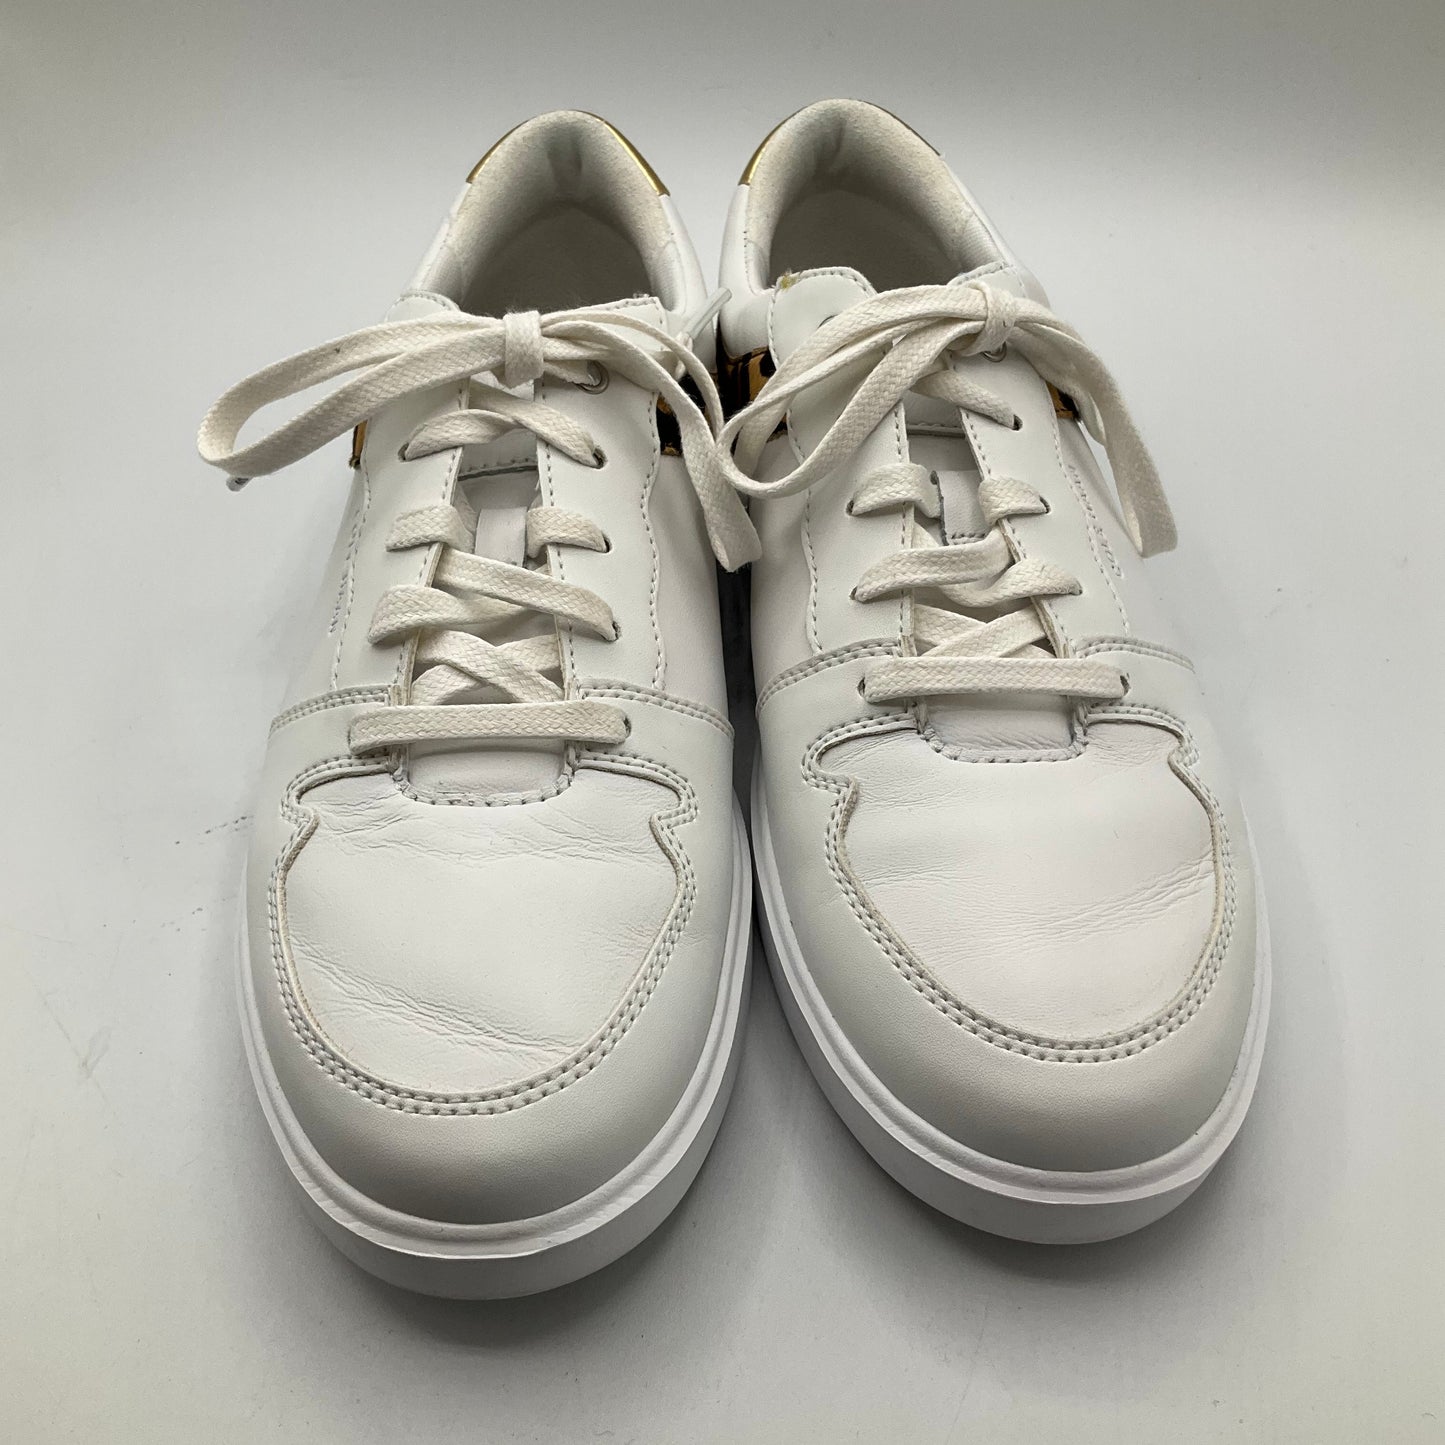 Shoes Sneakers By Cole-haan  Size: 7.5